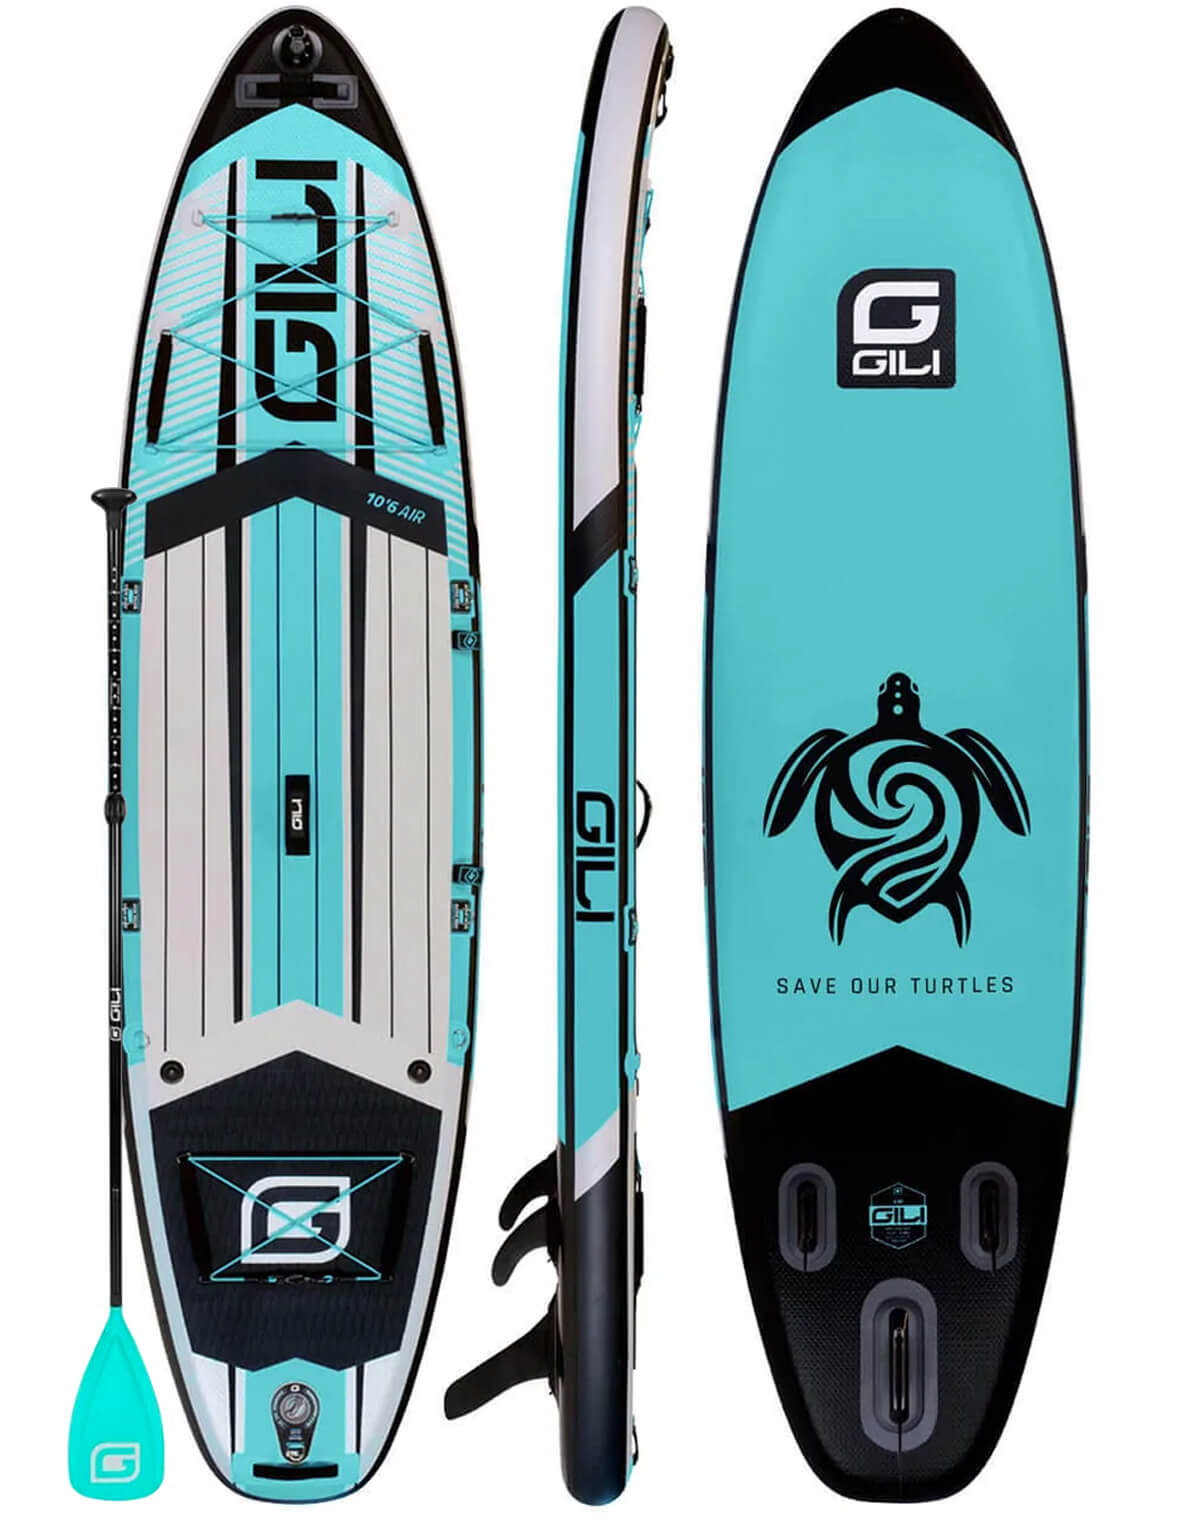 GILI 10'6 AIR Inflatable Paddle Board Save The Turtles